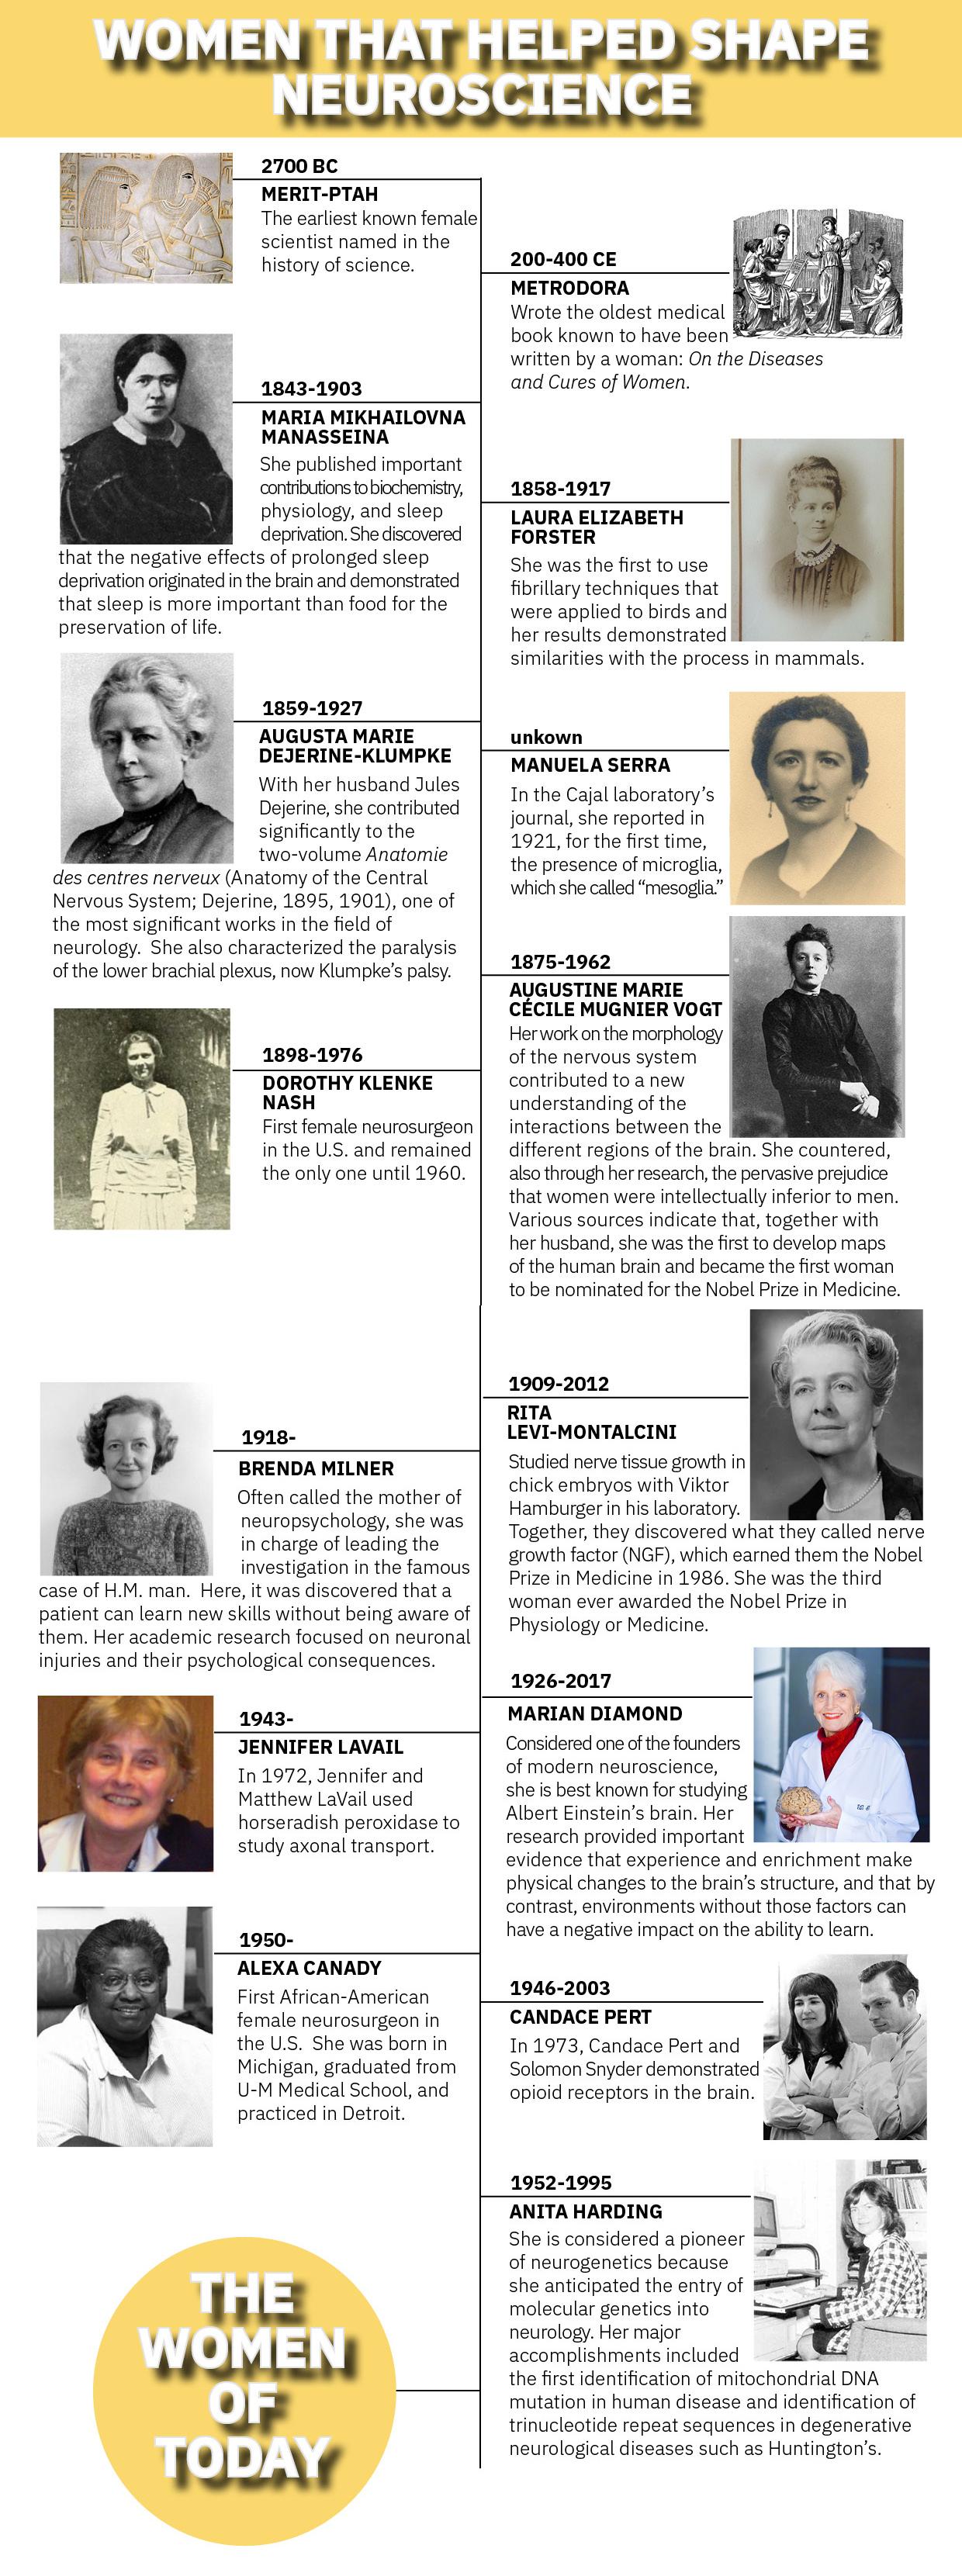 NeuroNetwork for Emerging Therapies timeline of history of women in neurology and neuroscience